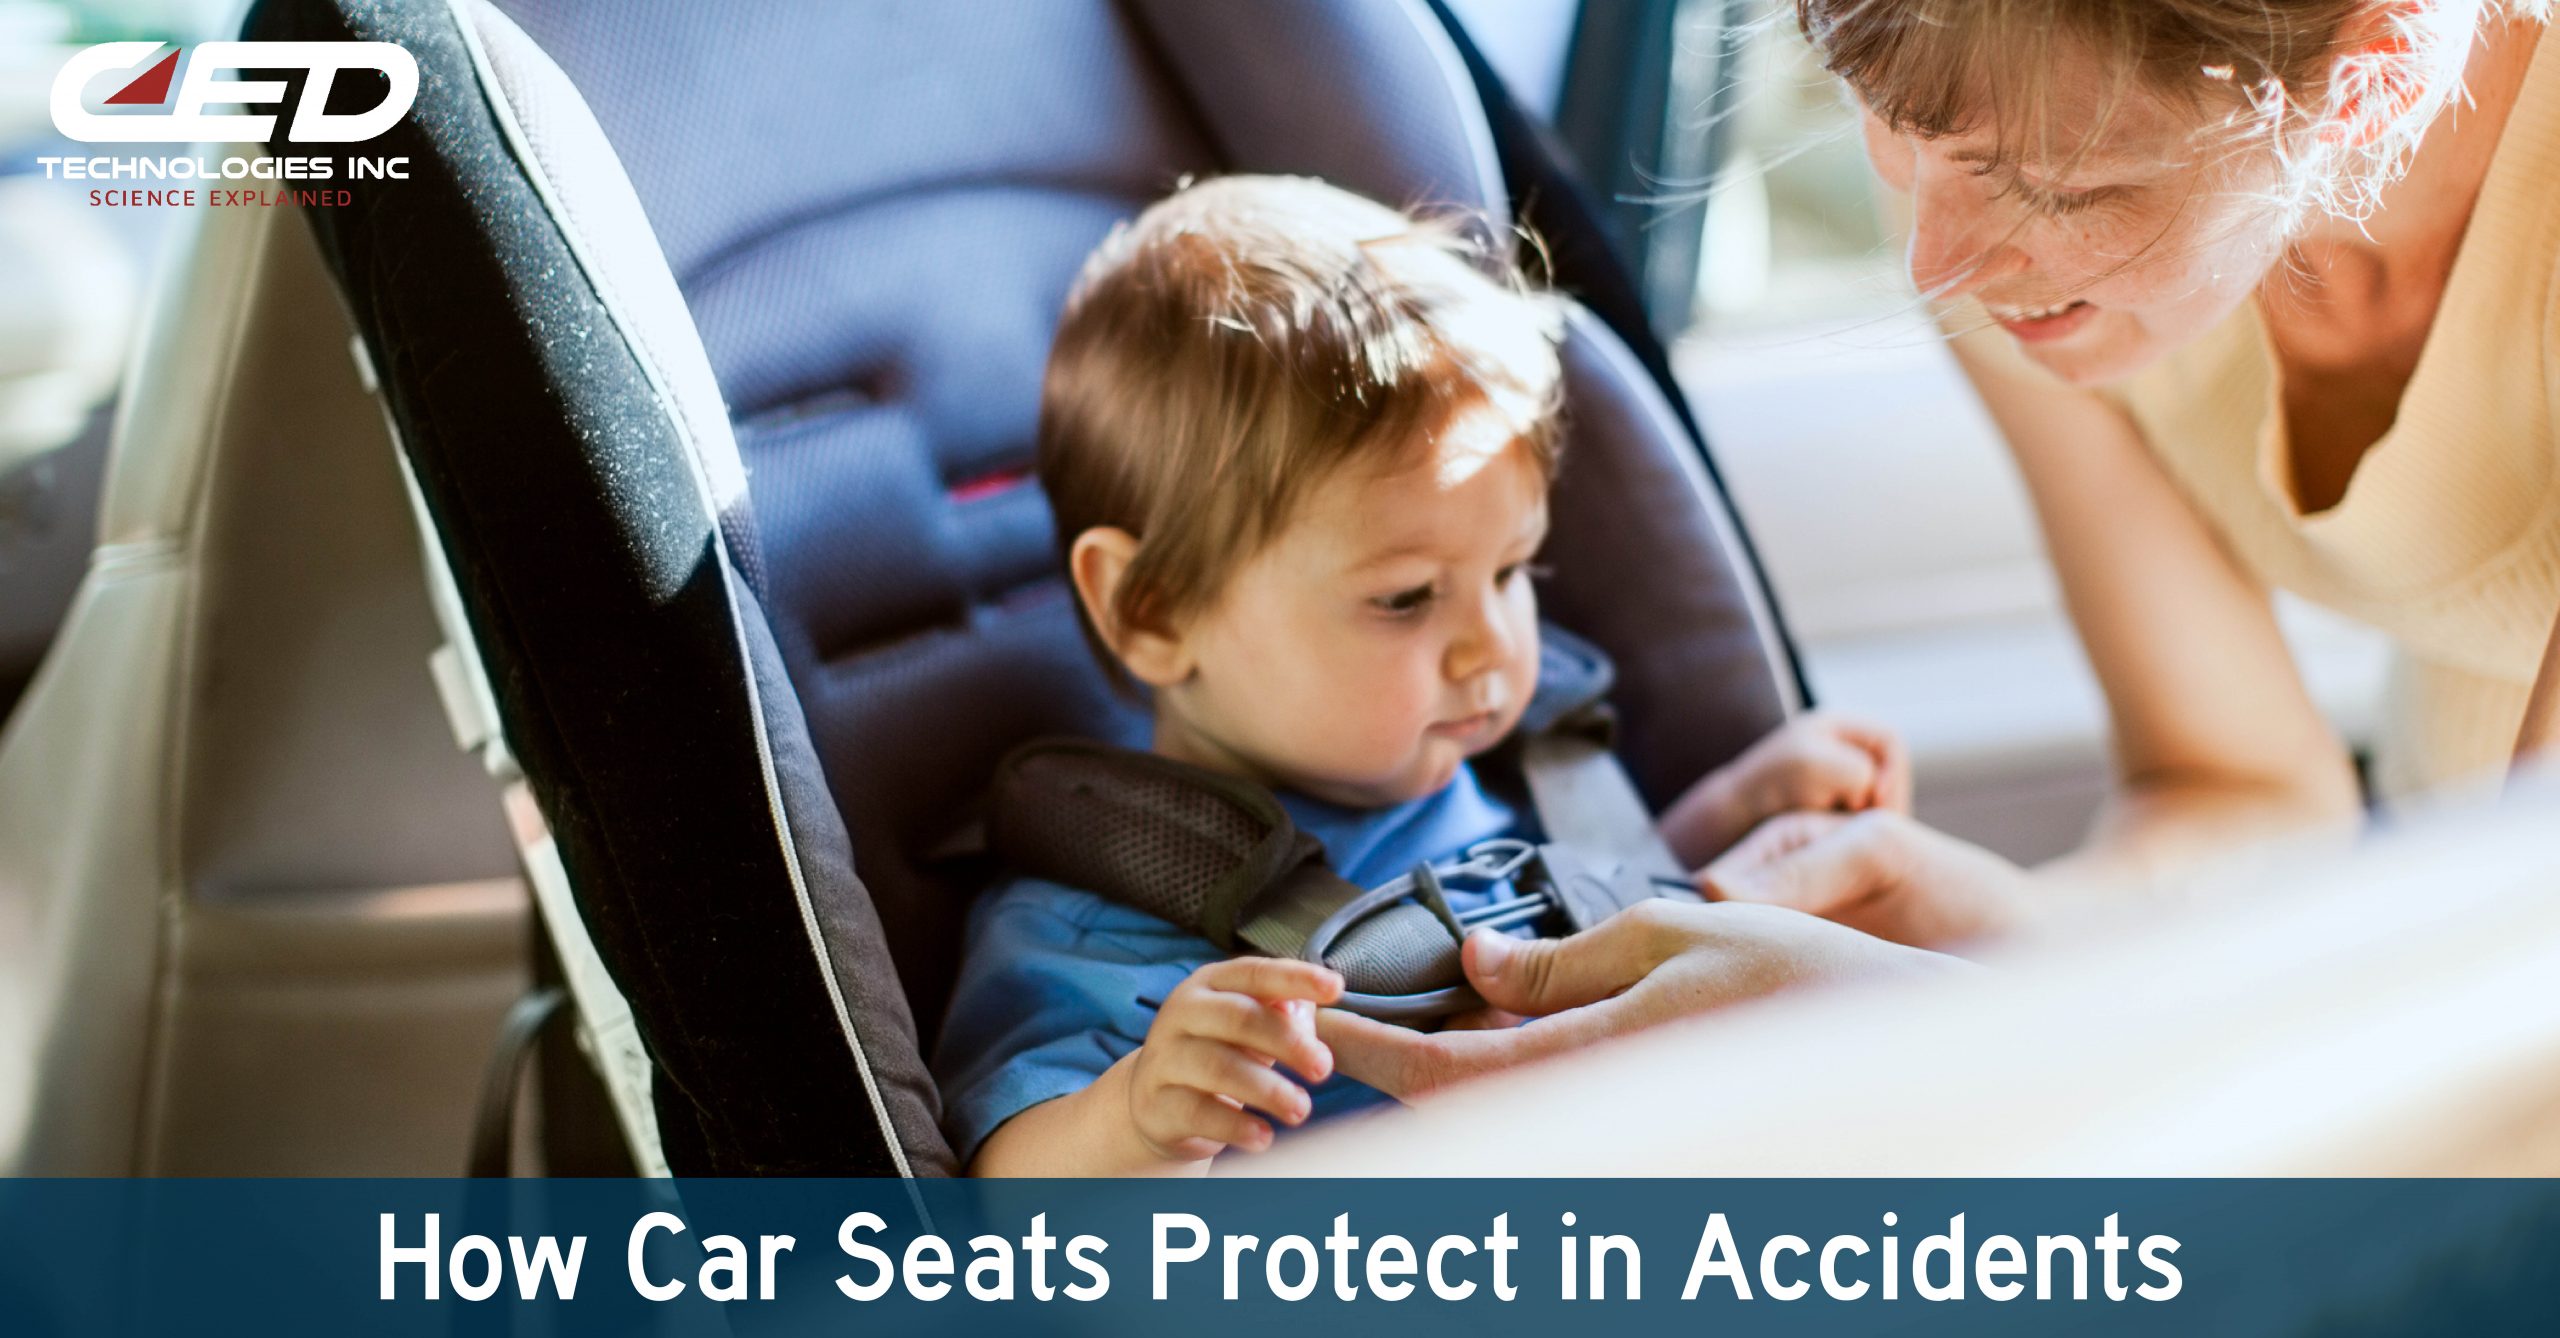 Child Restraints and Car Accidents